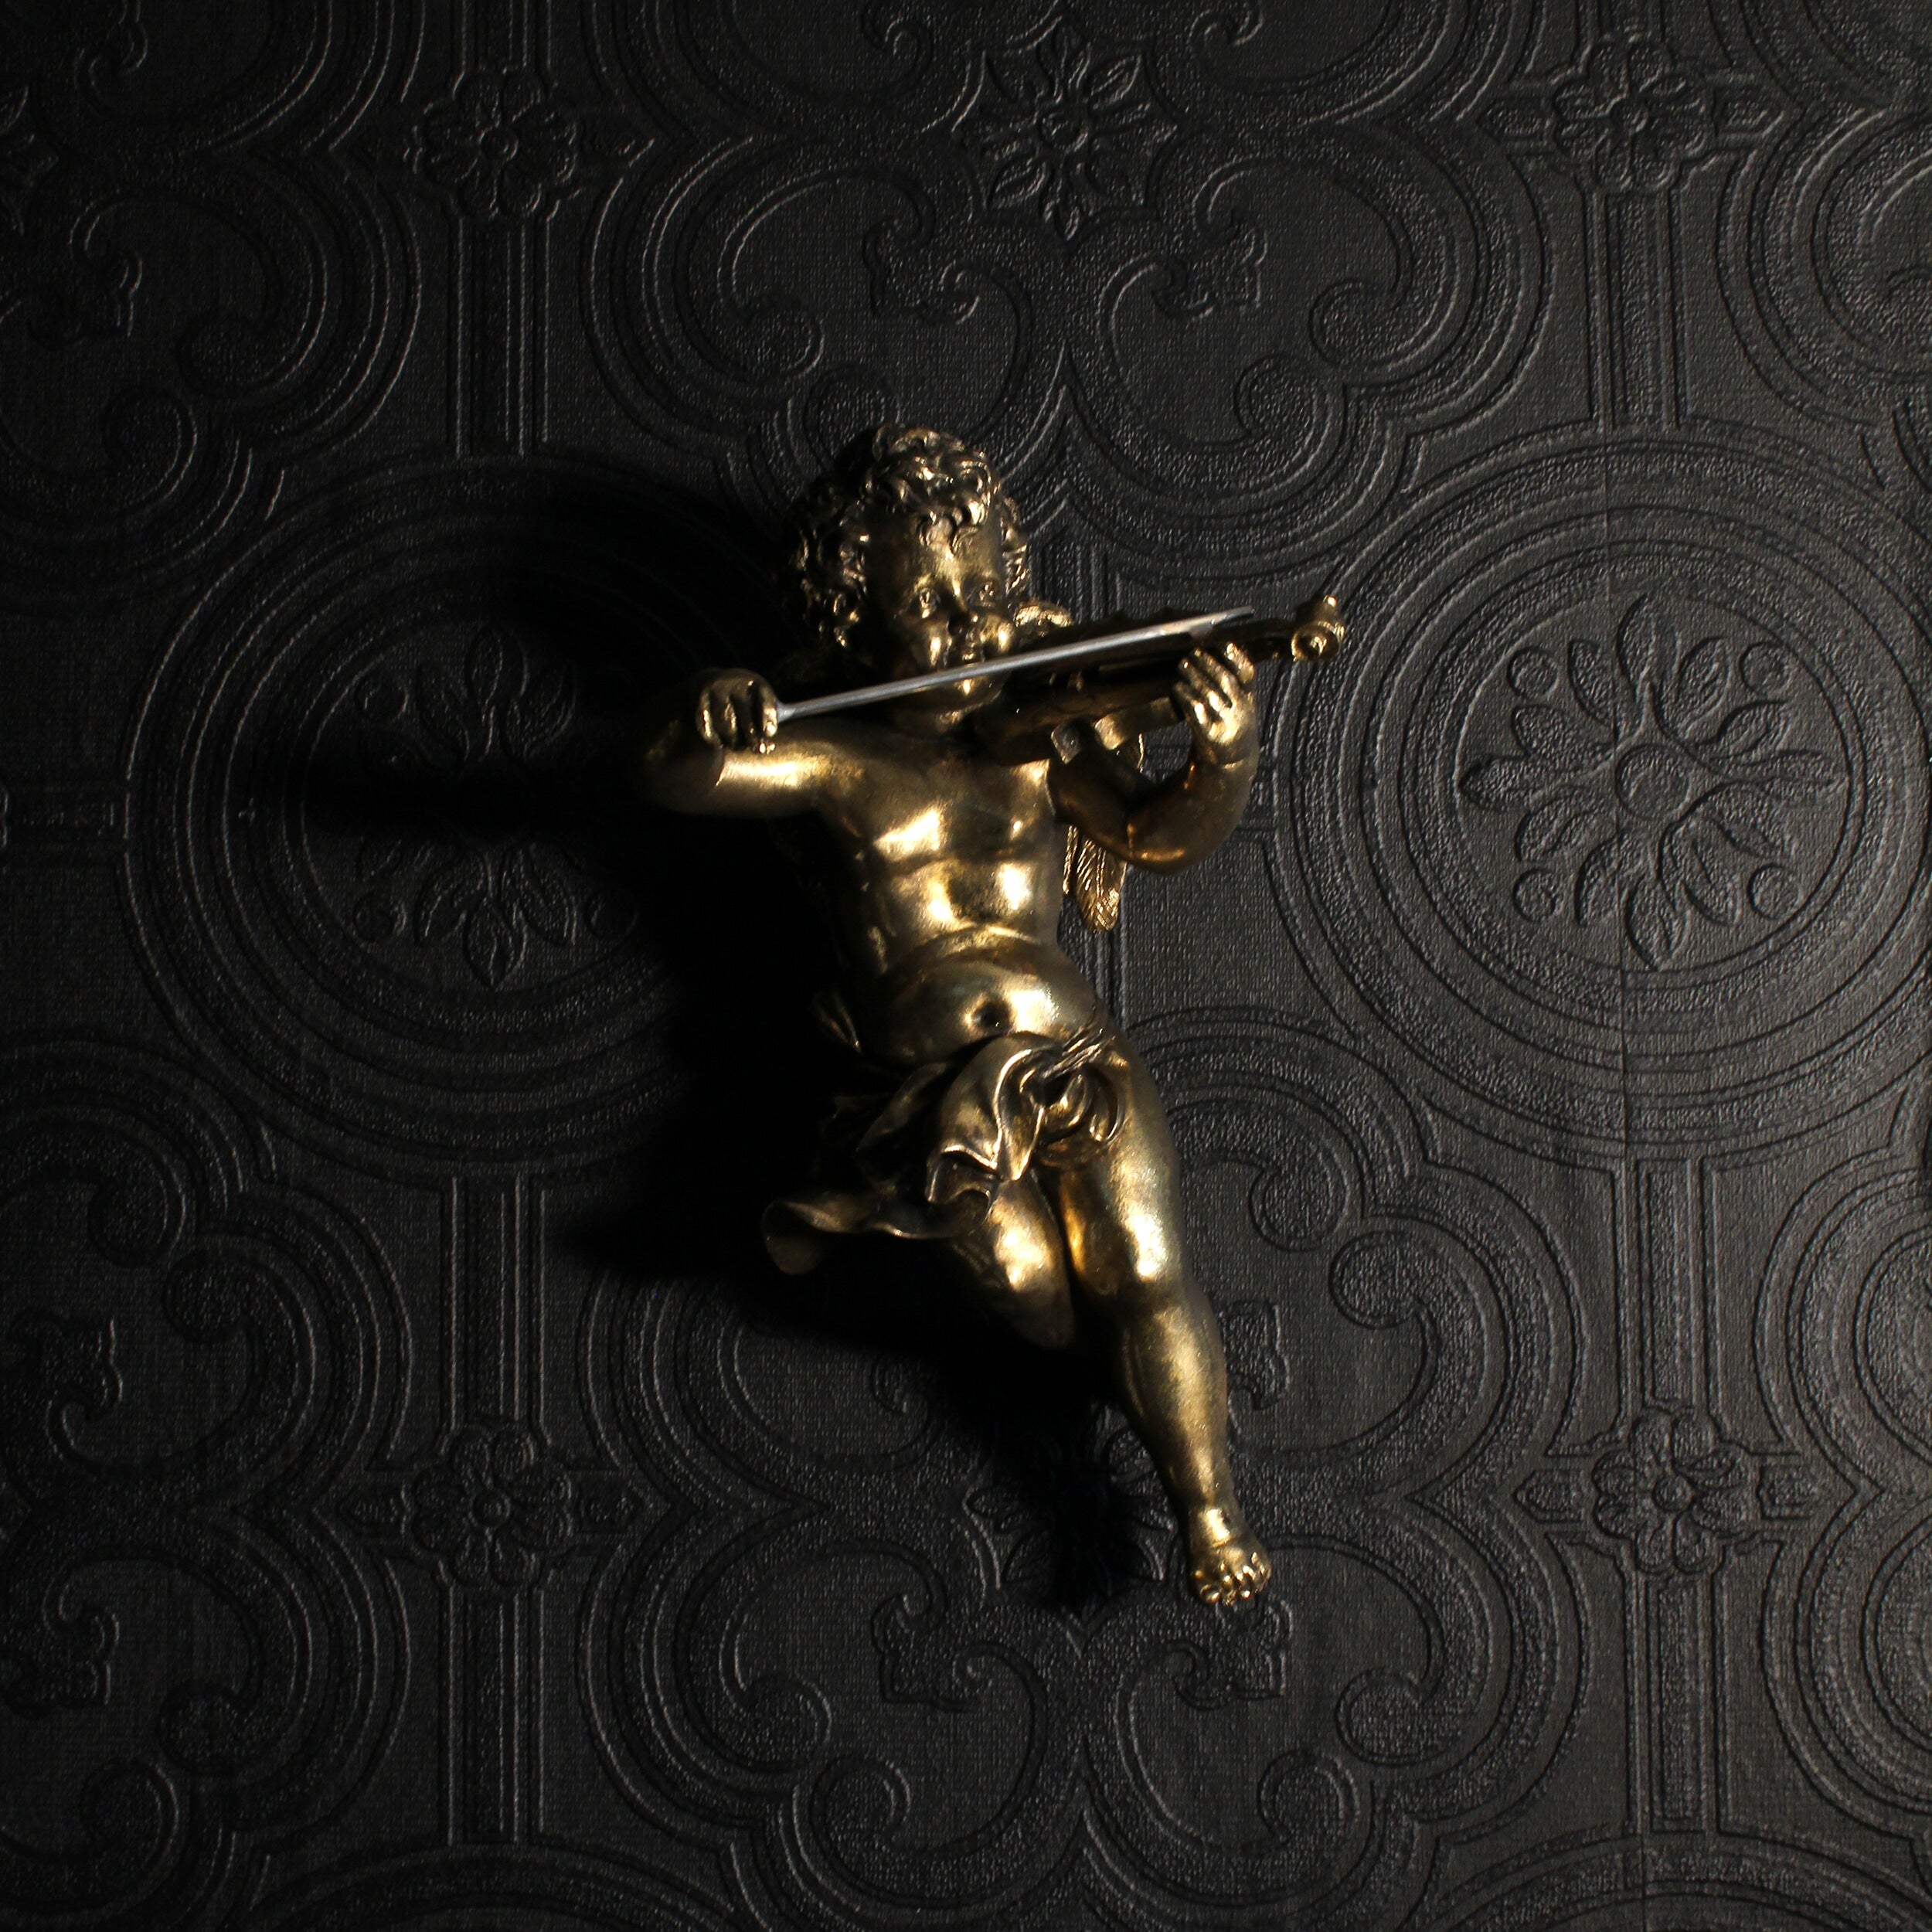 GOLD CHERUB WITH VIOLIN WALL DECOR BY THE BLACKENED TEETH THE BLACKENED ABODE